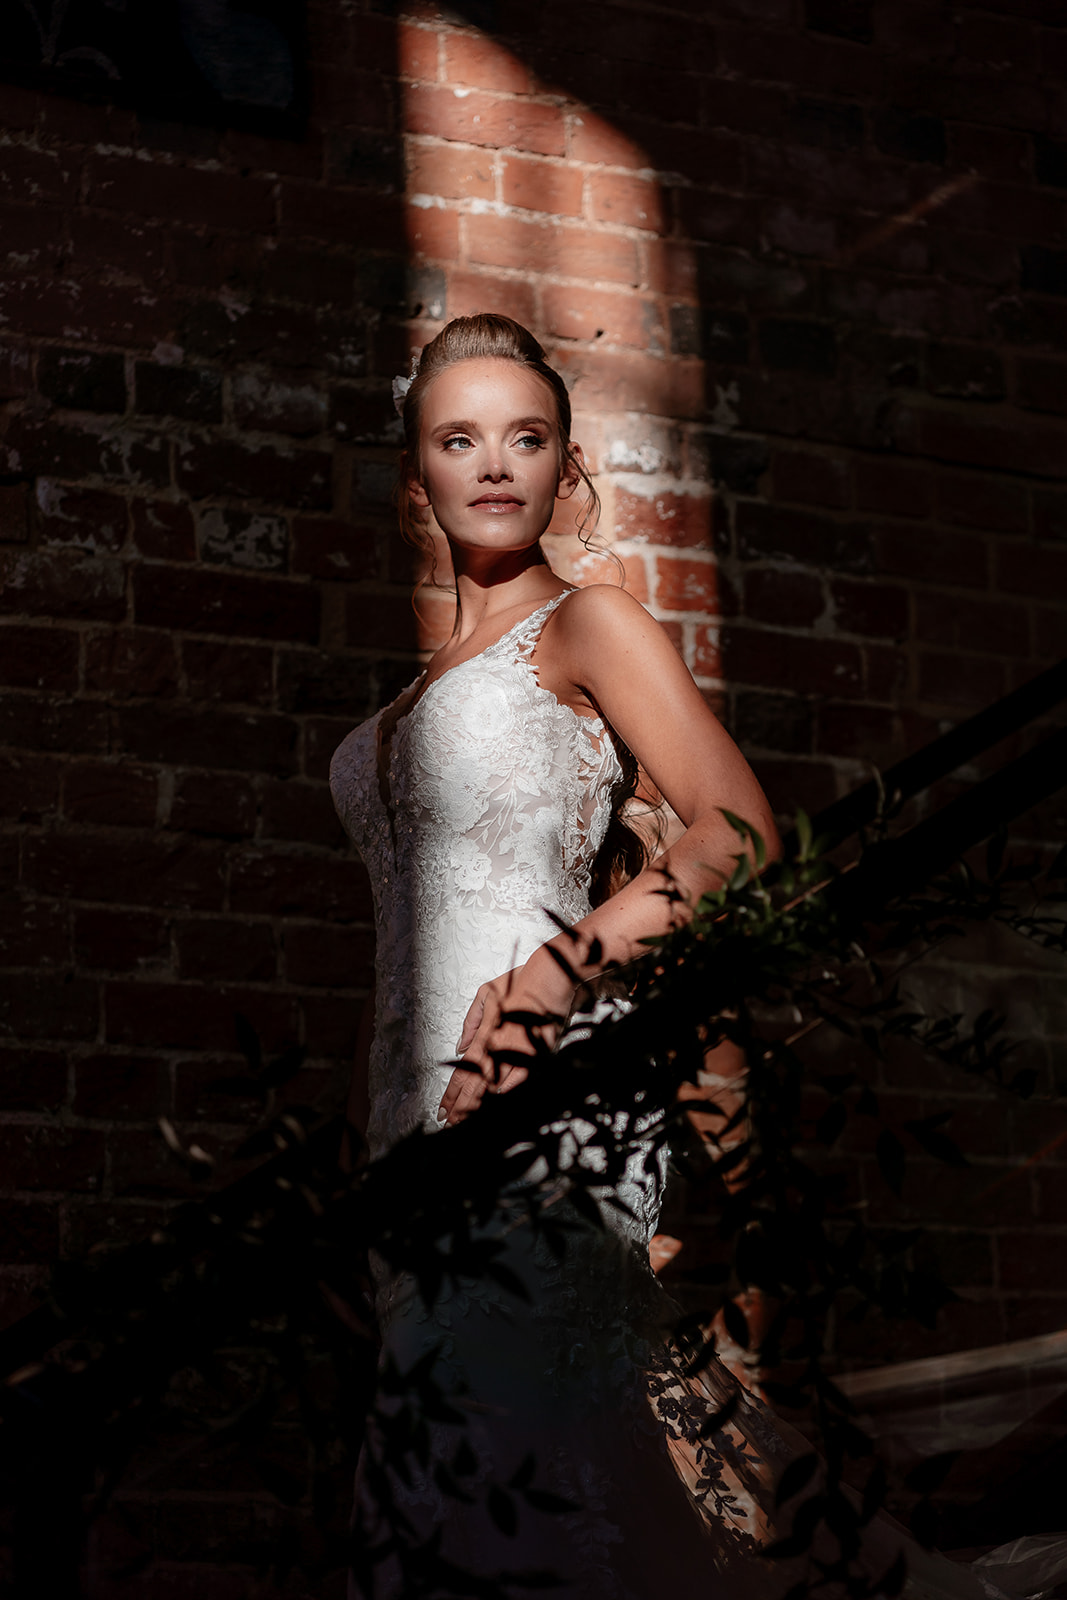 Bride stands in a shaft of light on a staircase at the Bombay Sapphire Distillery.